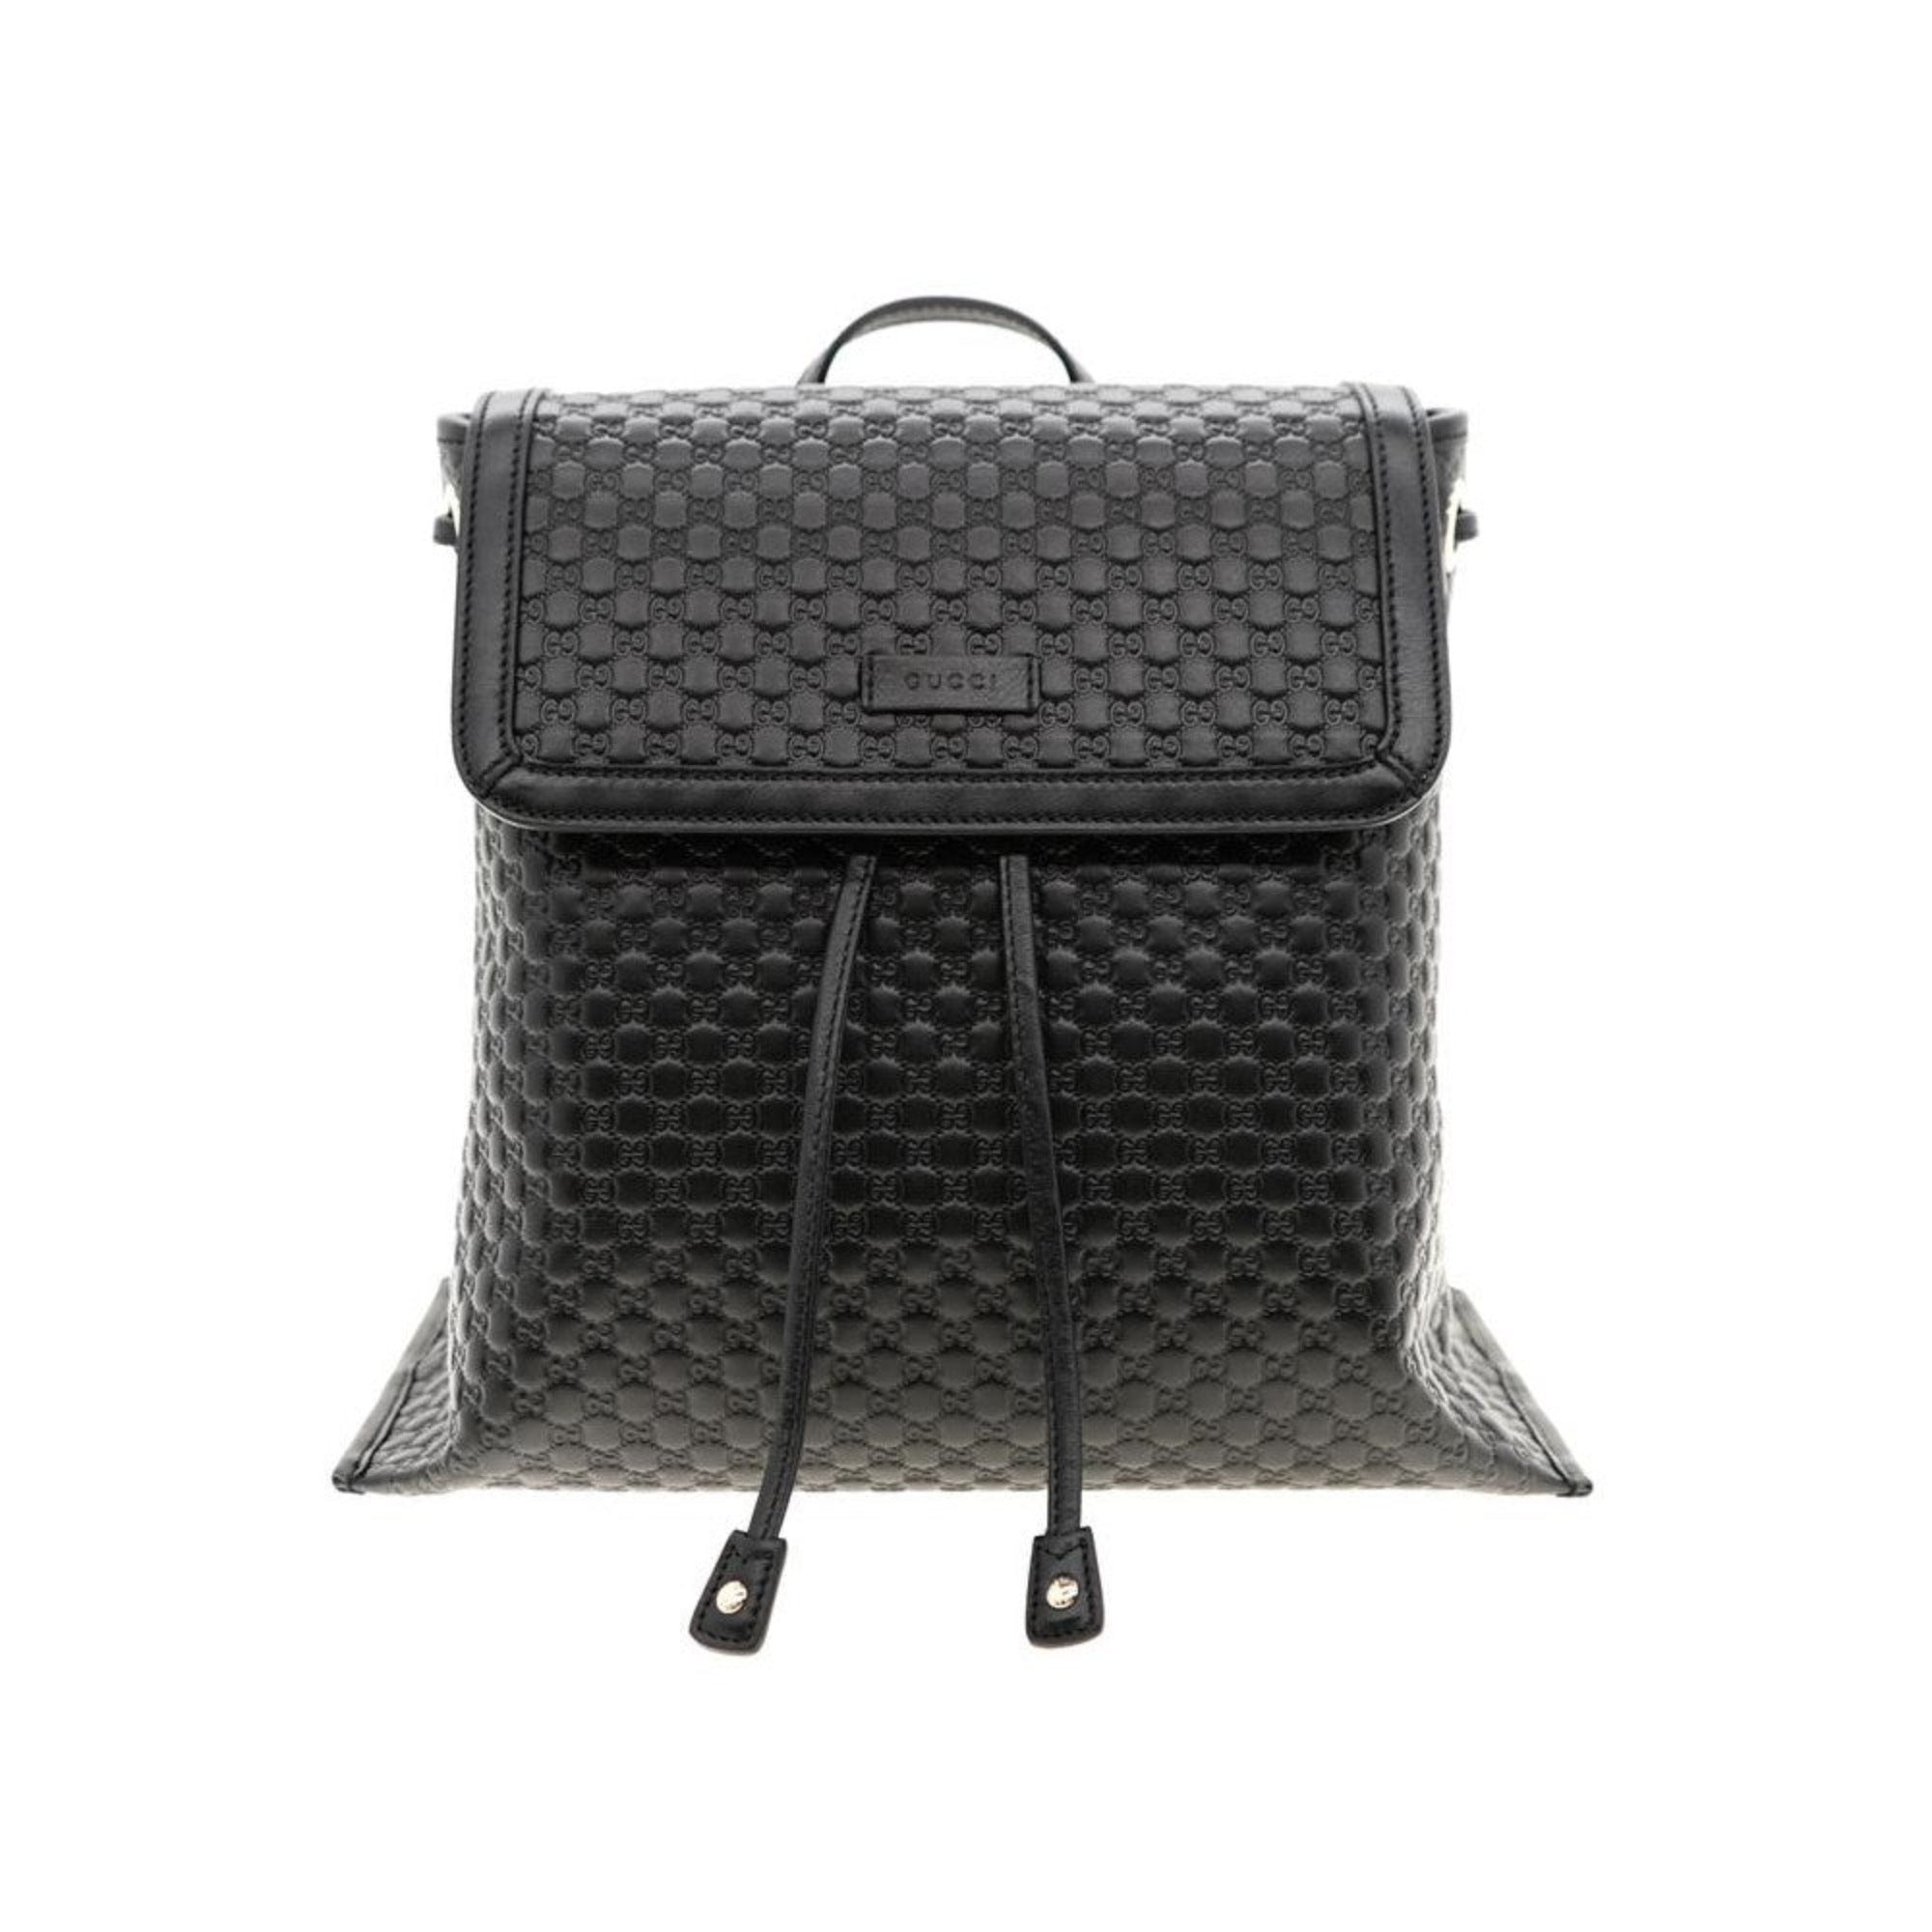 Gucci Microguccisima Black Leather Drawstring Backpack 607993 at_Queen_Bee_of_Beverly_Hills